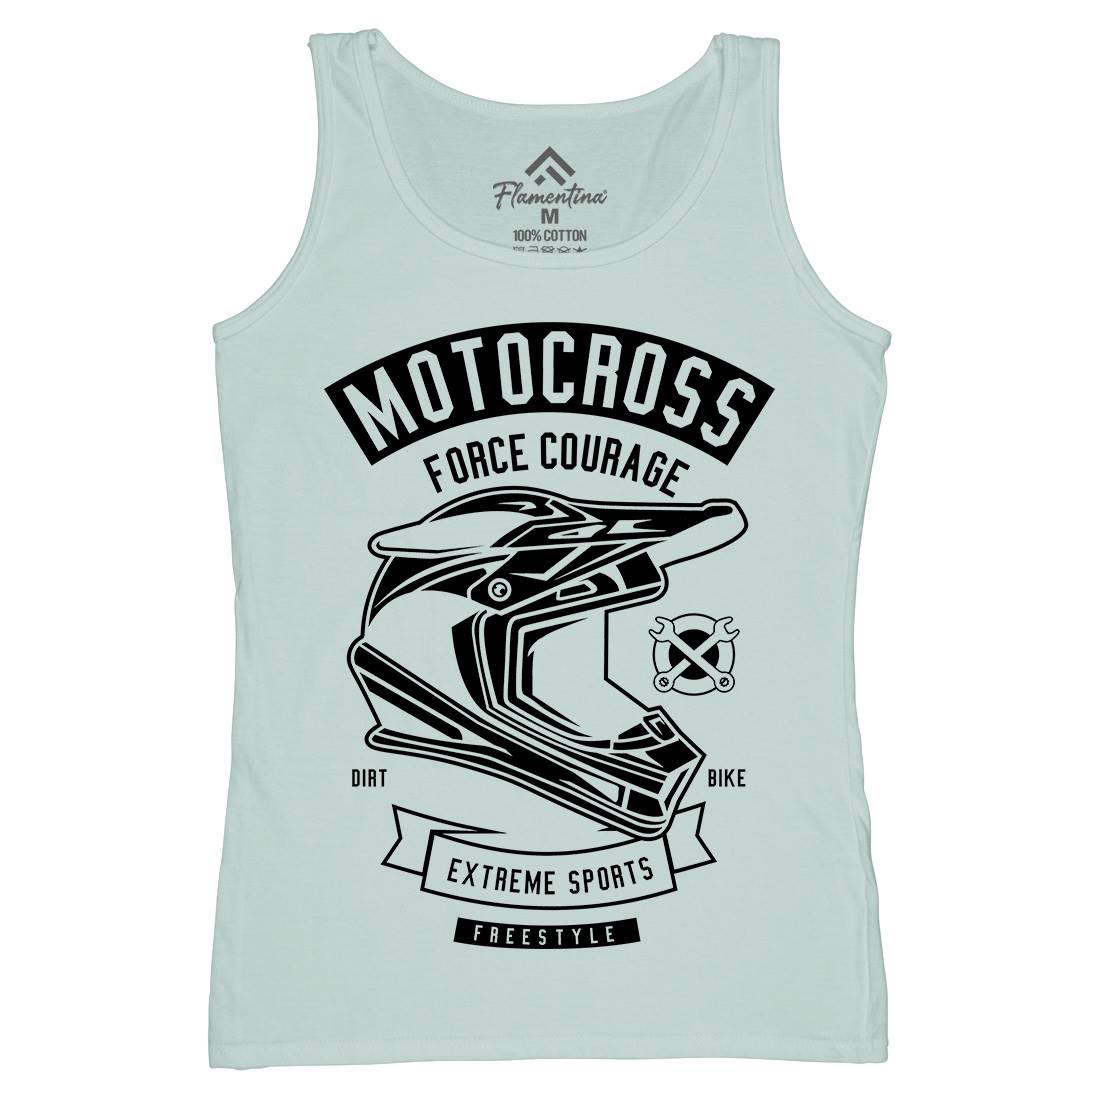 Motocross Force Courage Womens Organic Tank Top Vest Motorcycles B576